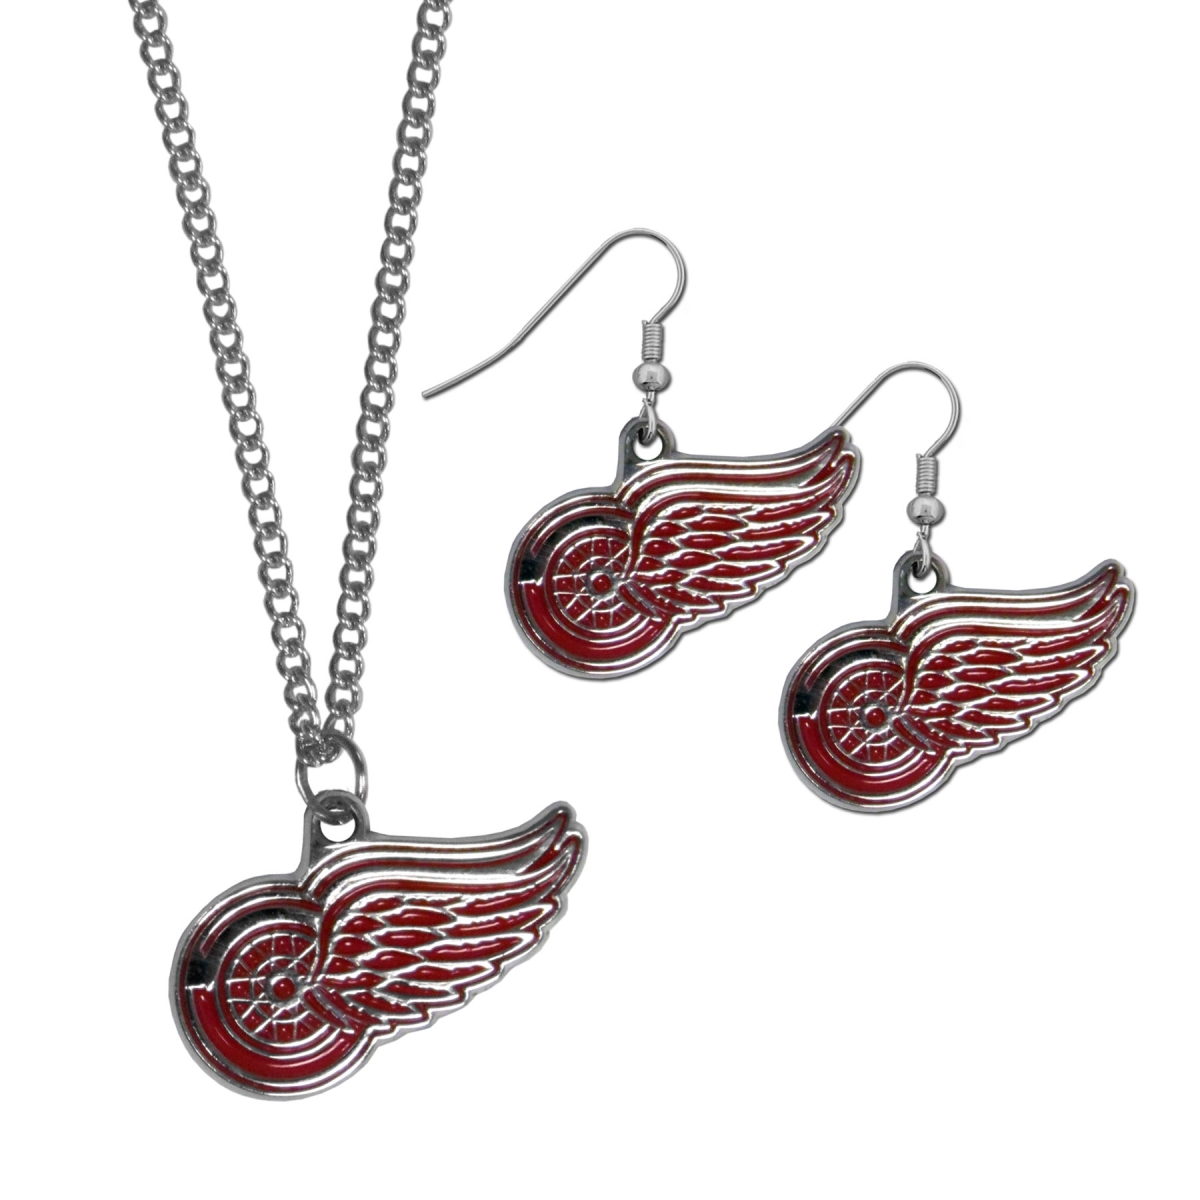 Picture of Siskiyou HDEN110HN Female NHL Detroit Red Wings Dangle Earrings & Chain Necklaces Set - Set of 2